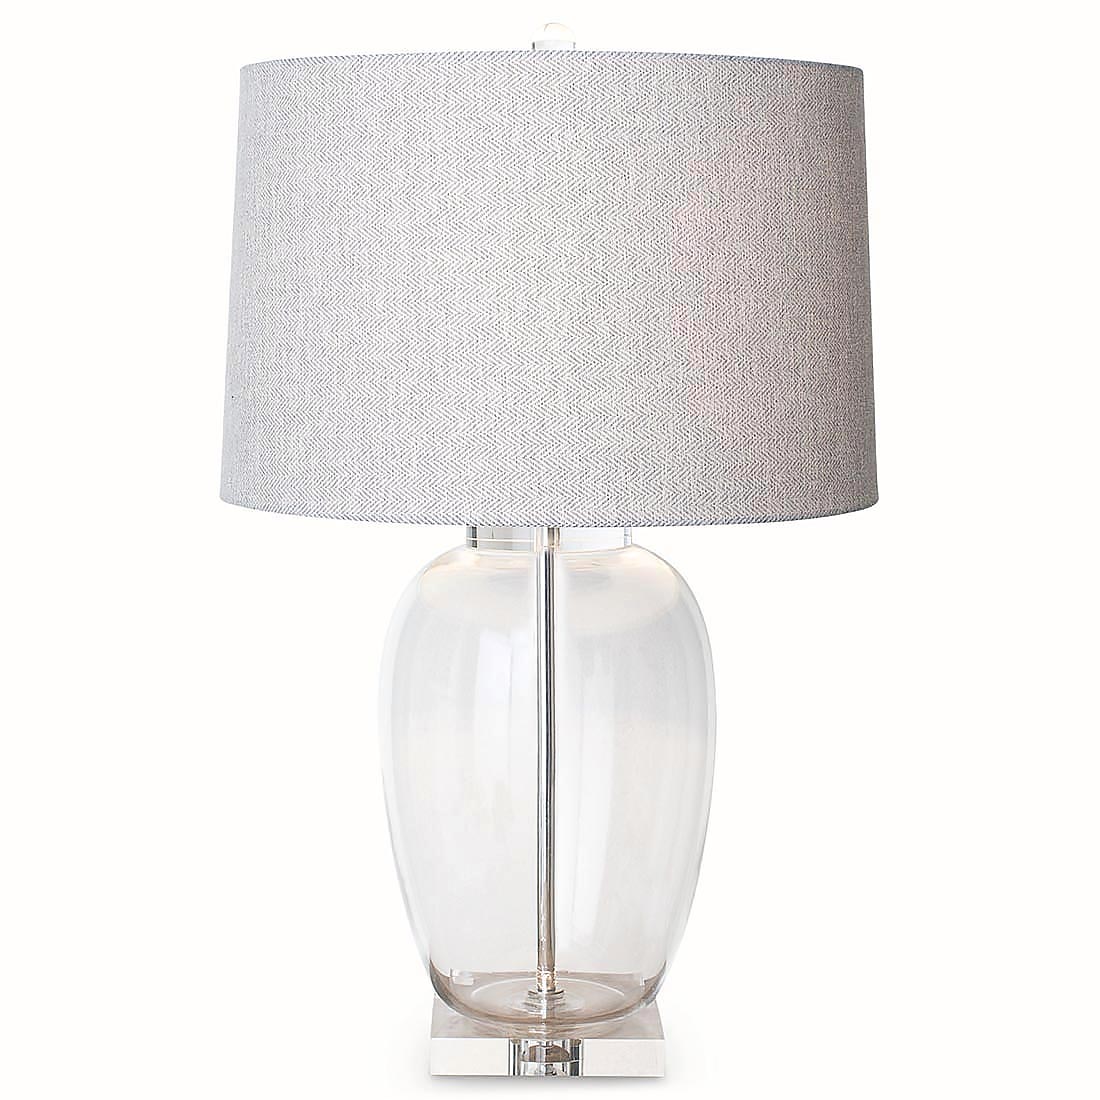 Oval Glass Table Lamp With Herringbone, Large Clear Glass Base Table Lamp